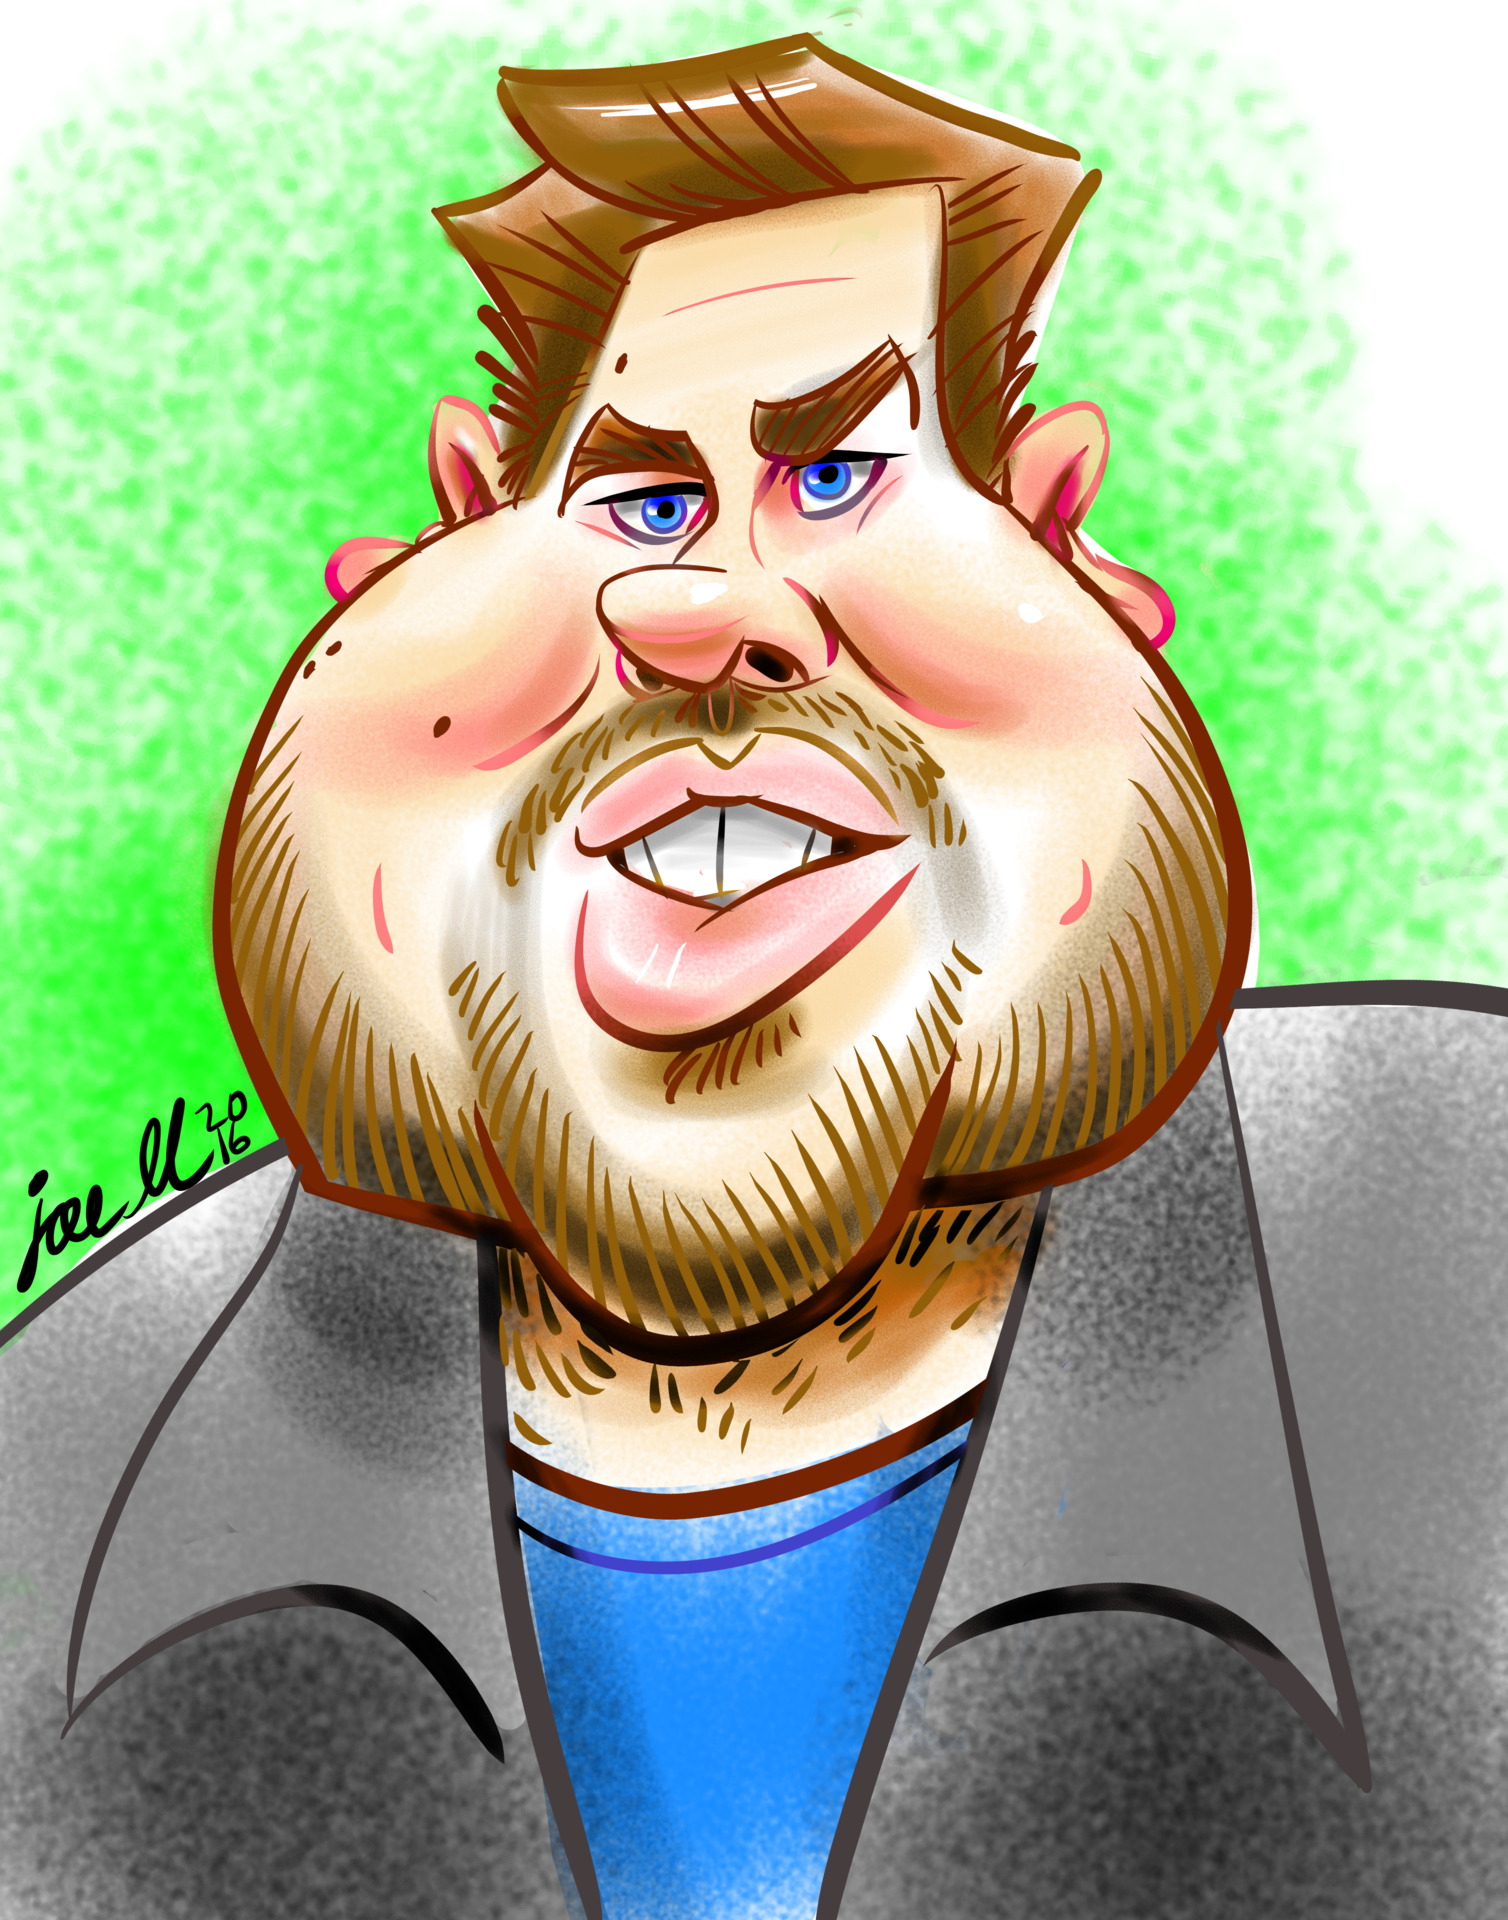 Many thanks to bigfaec for the caricature goodness this week!